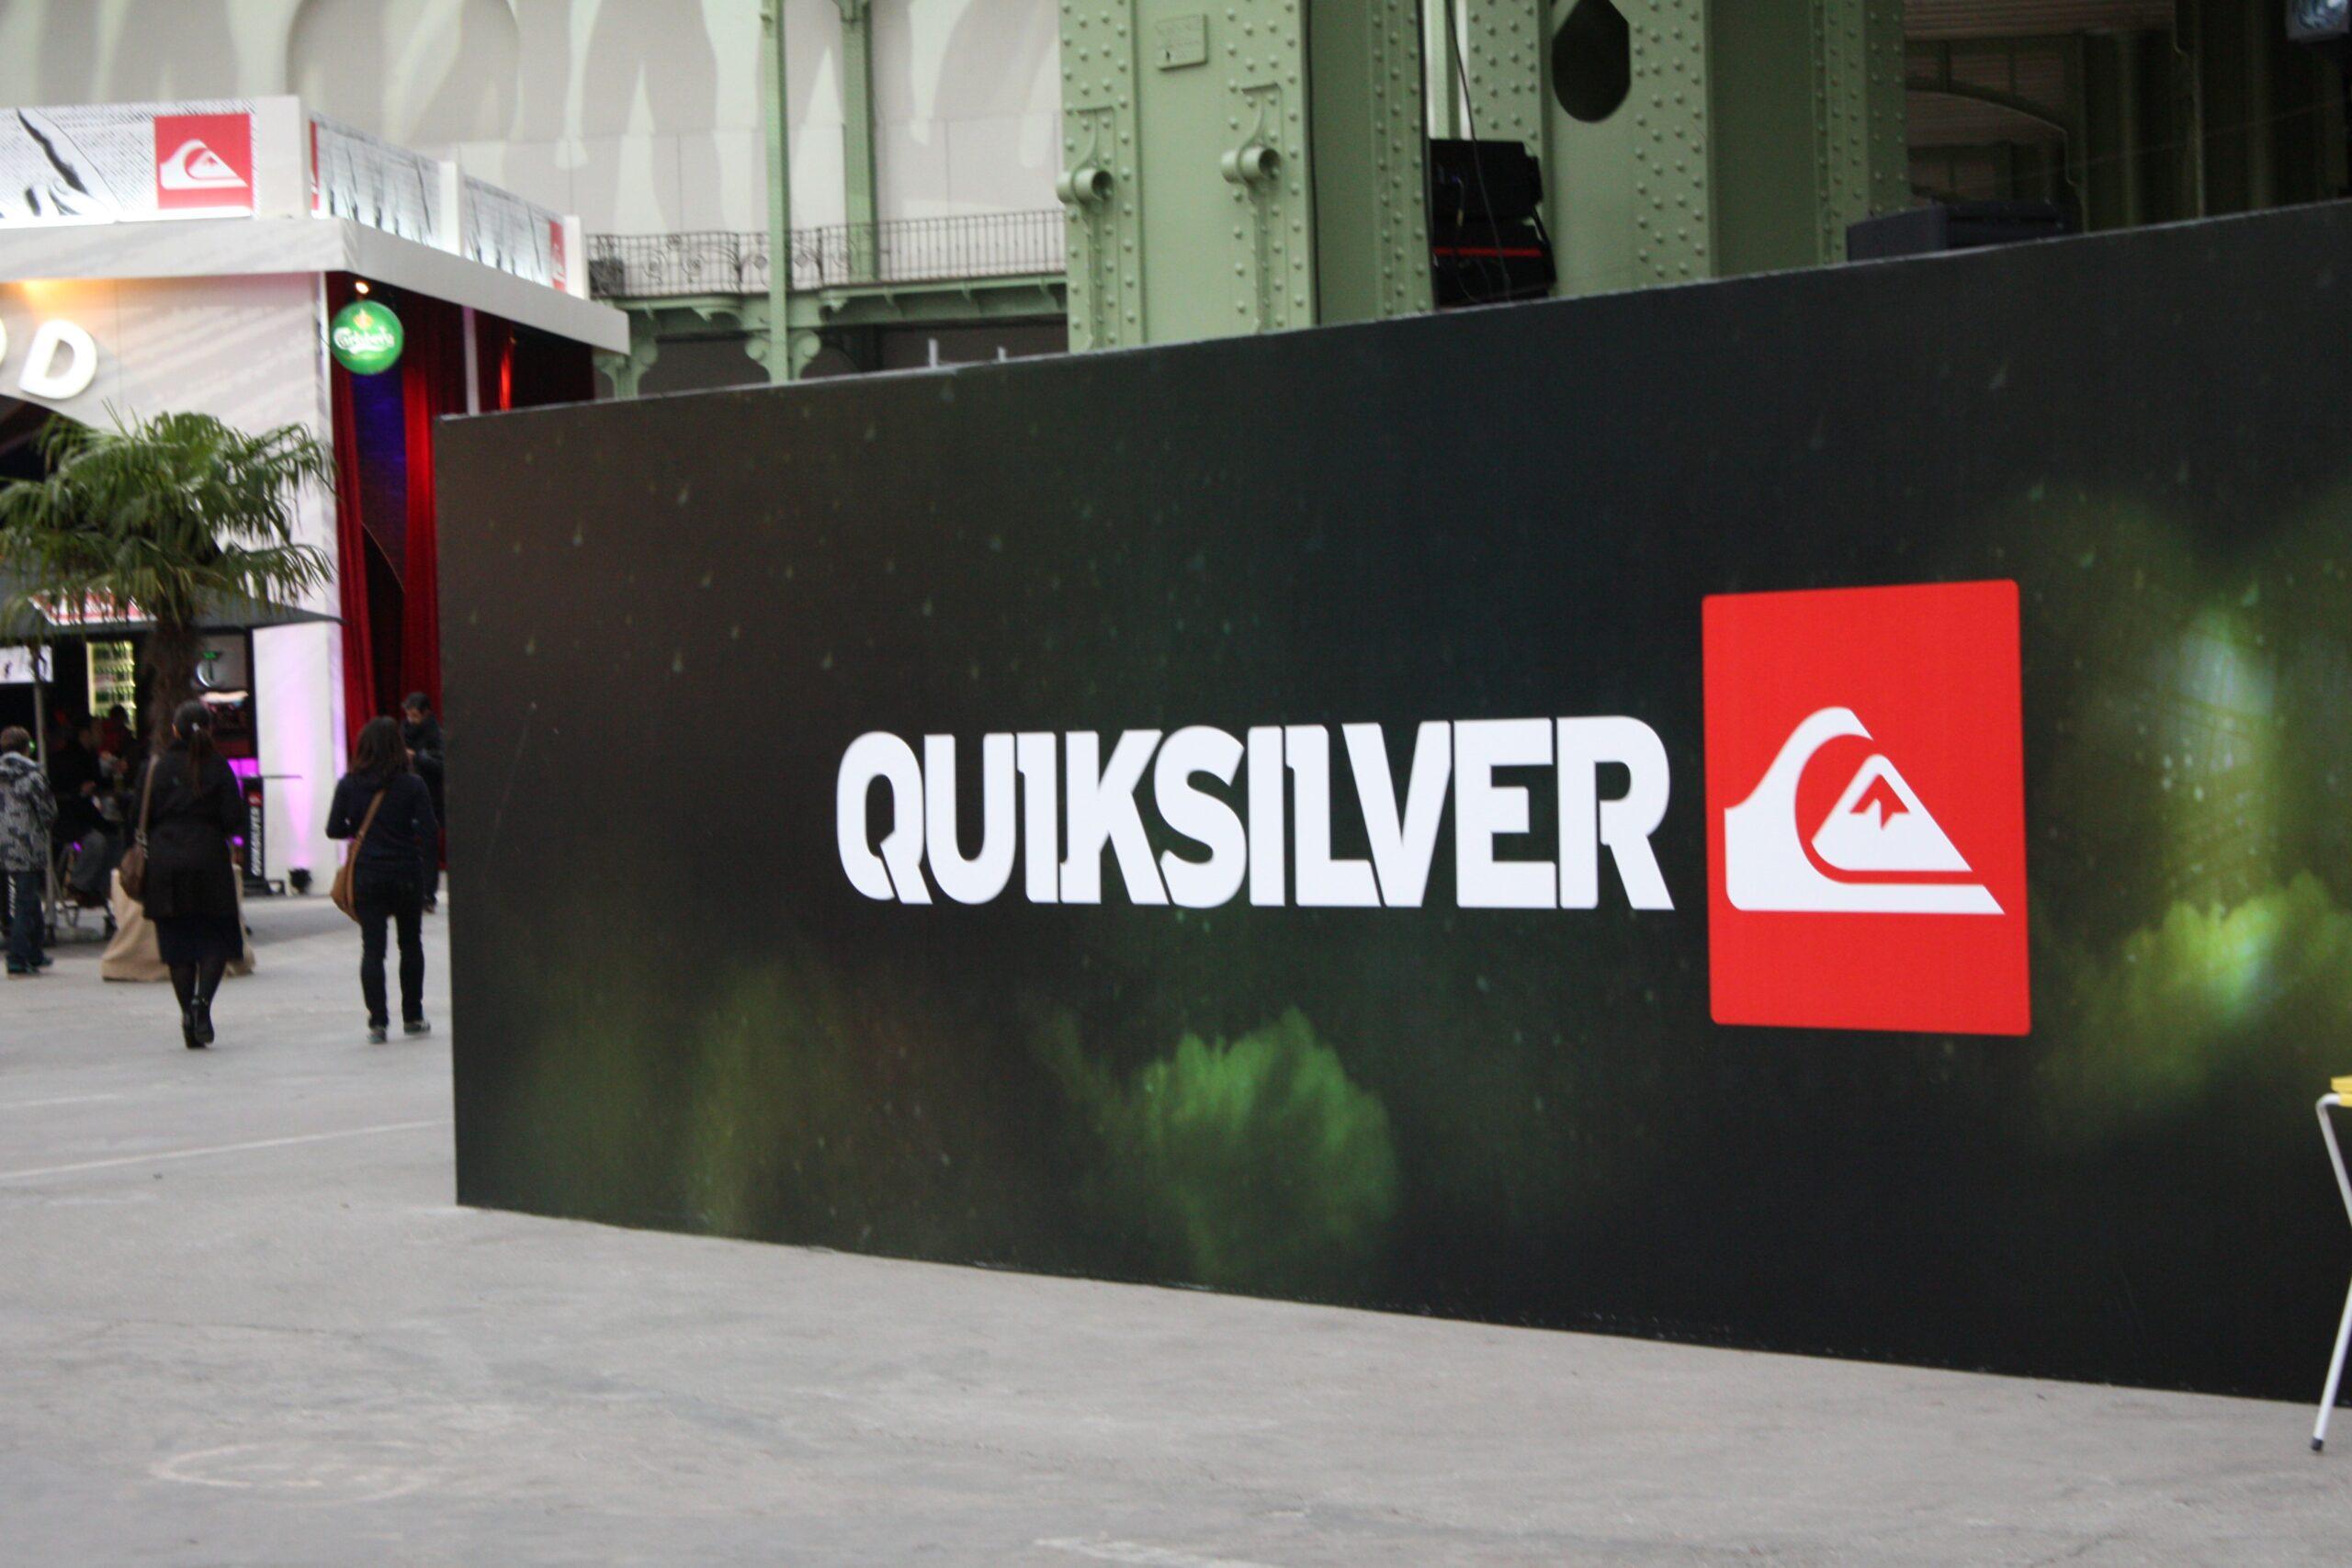 Quiksilver logo appearing on a black-coloured wall.